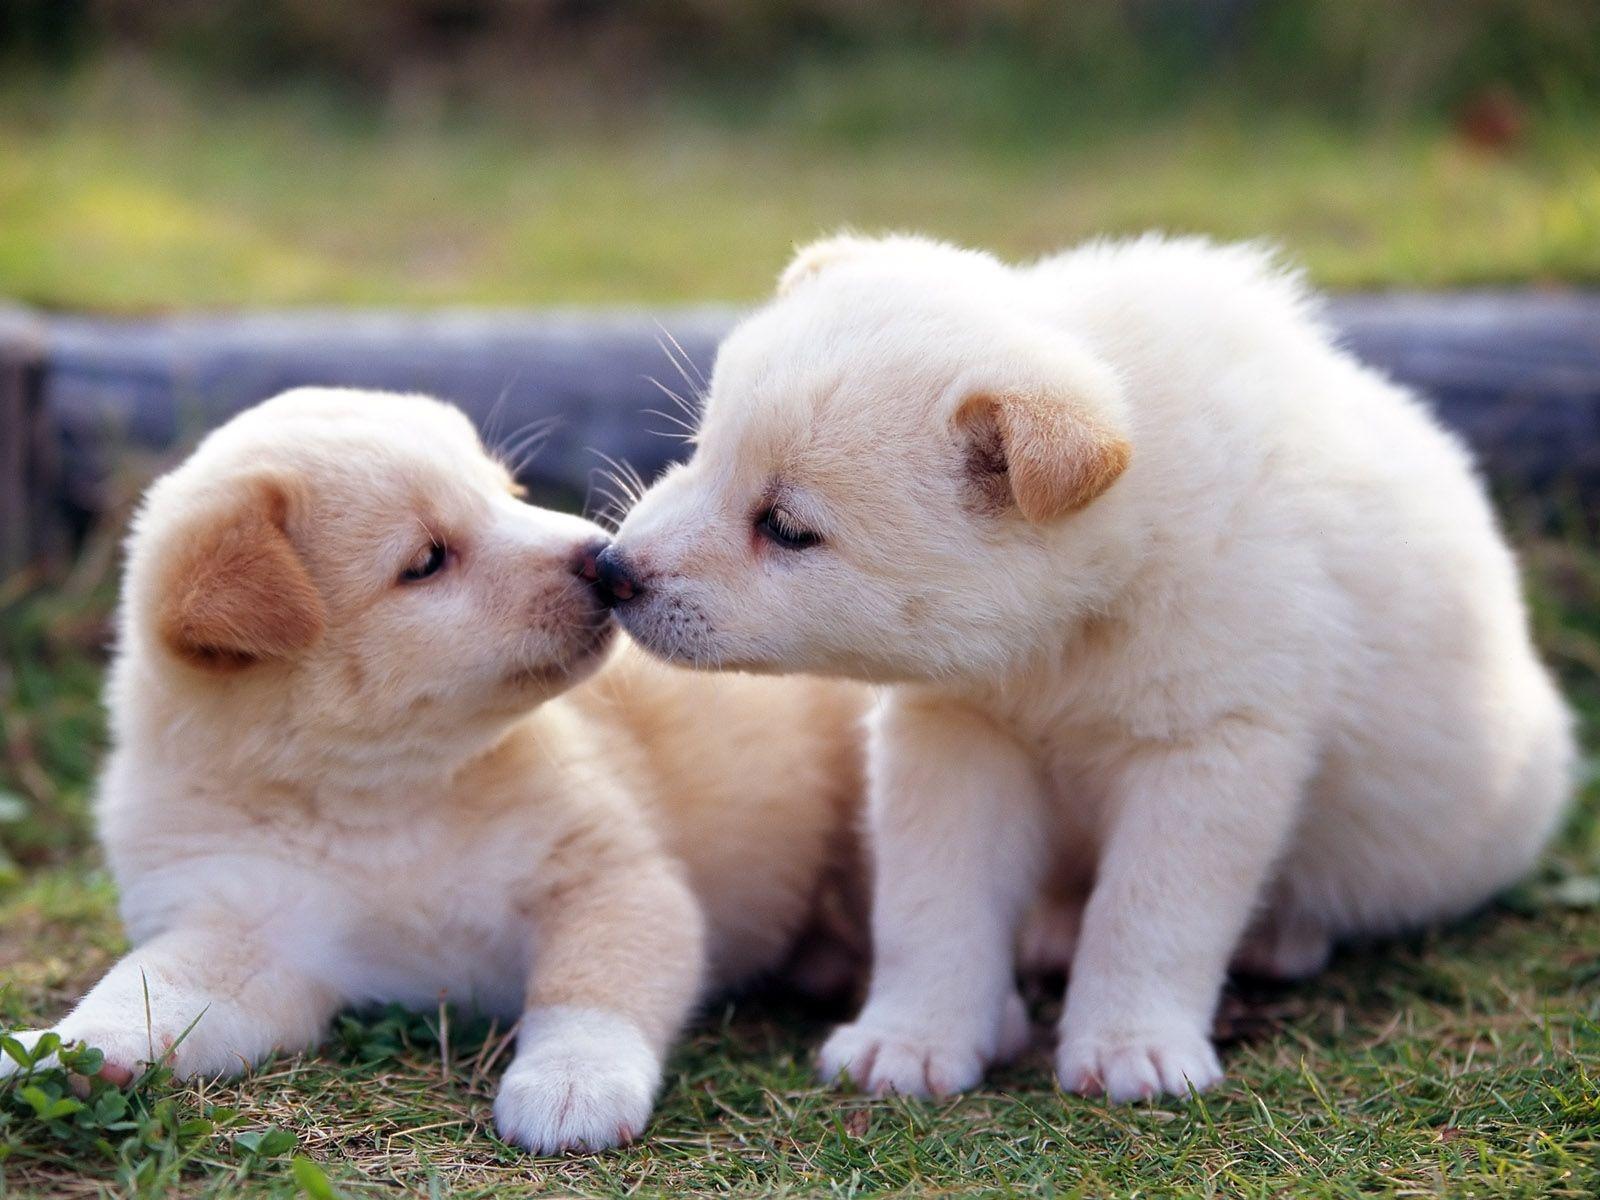 cats and dog kissing images 